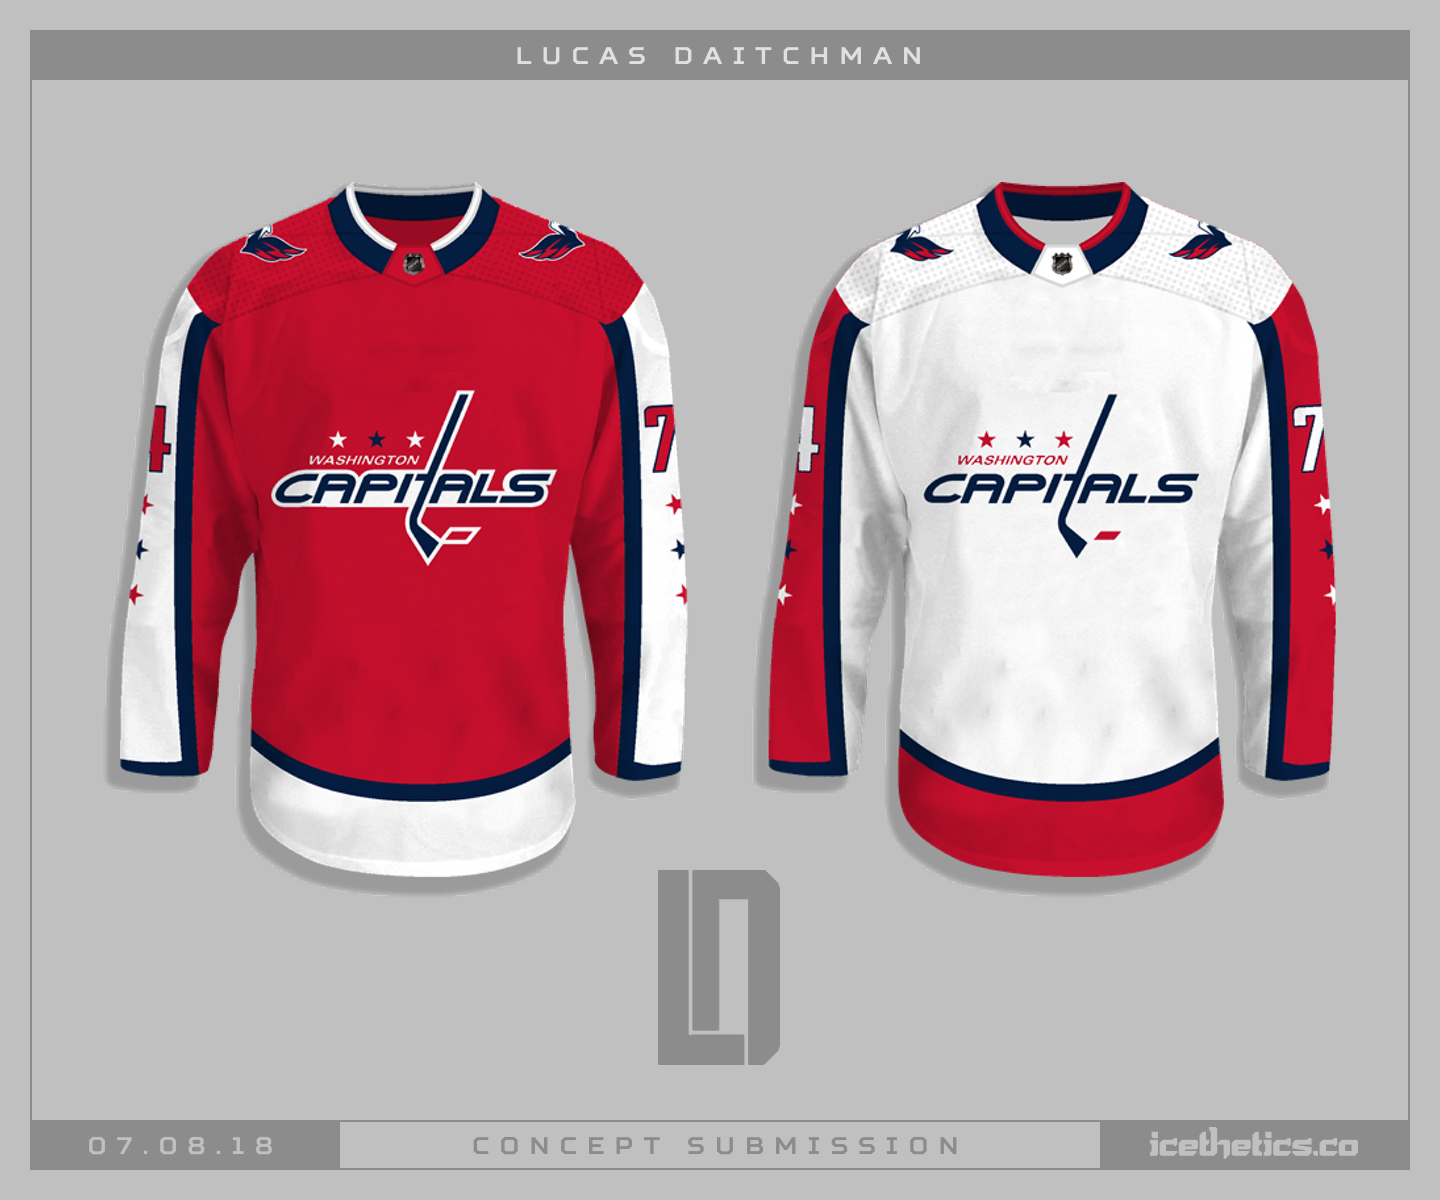 Washington Capitals jersey concept using iconic elements from over